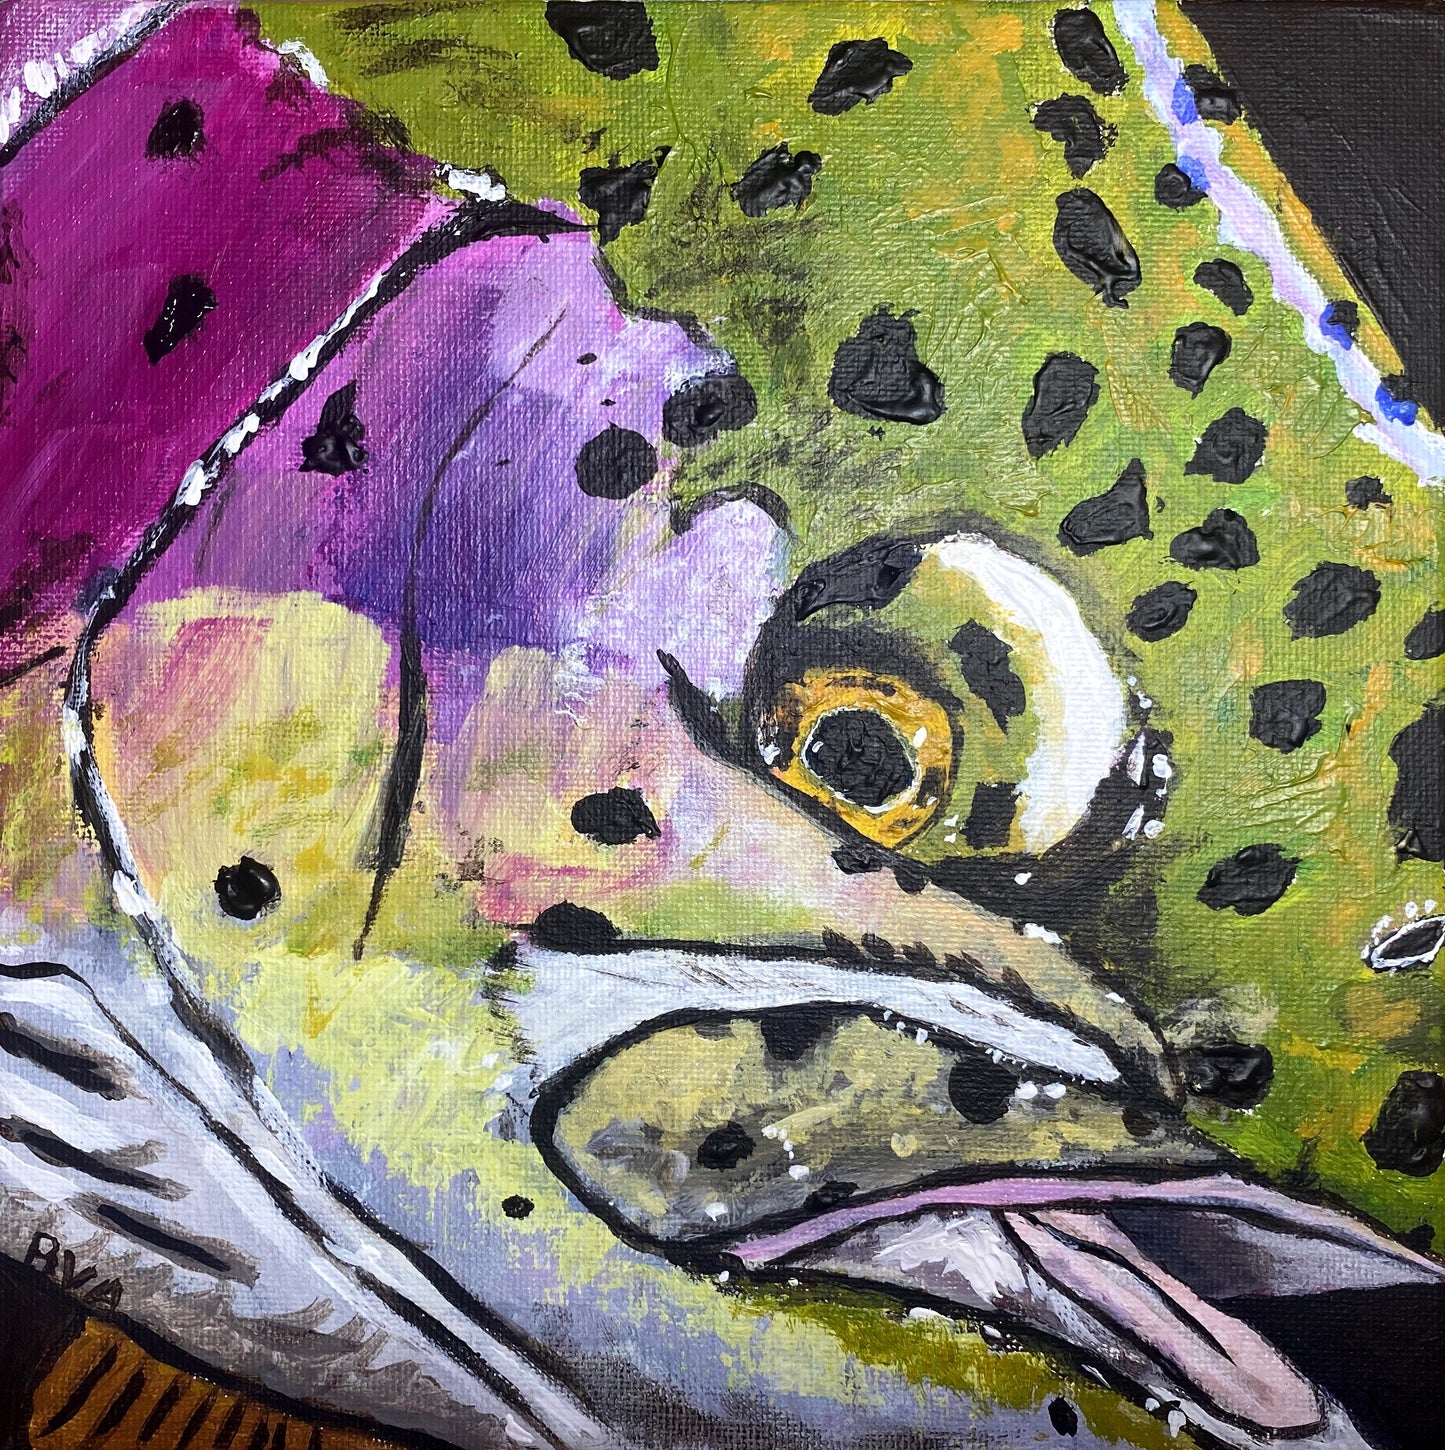 Colorful Rainbow Trout Acrylic Painting | Original Artwork on Canvas Board